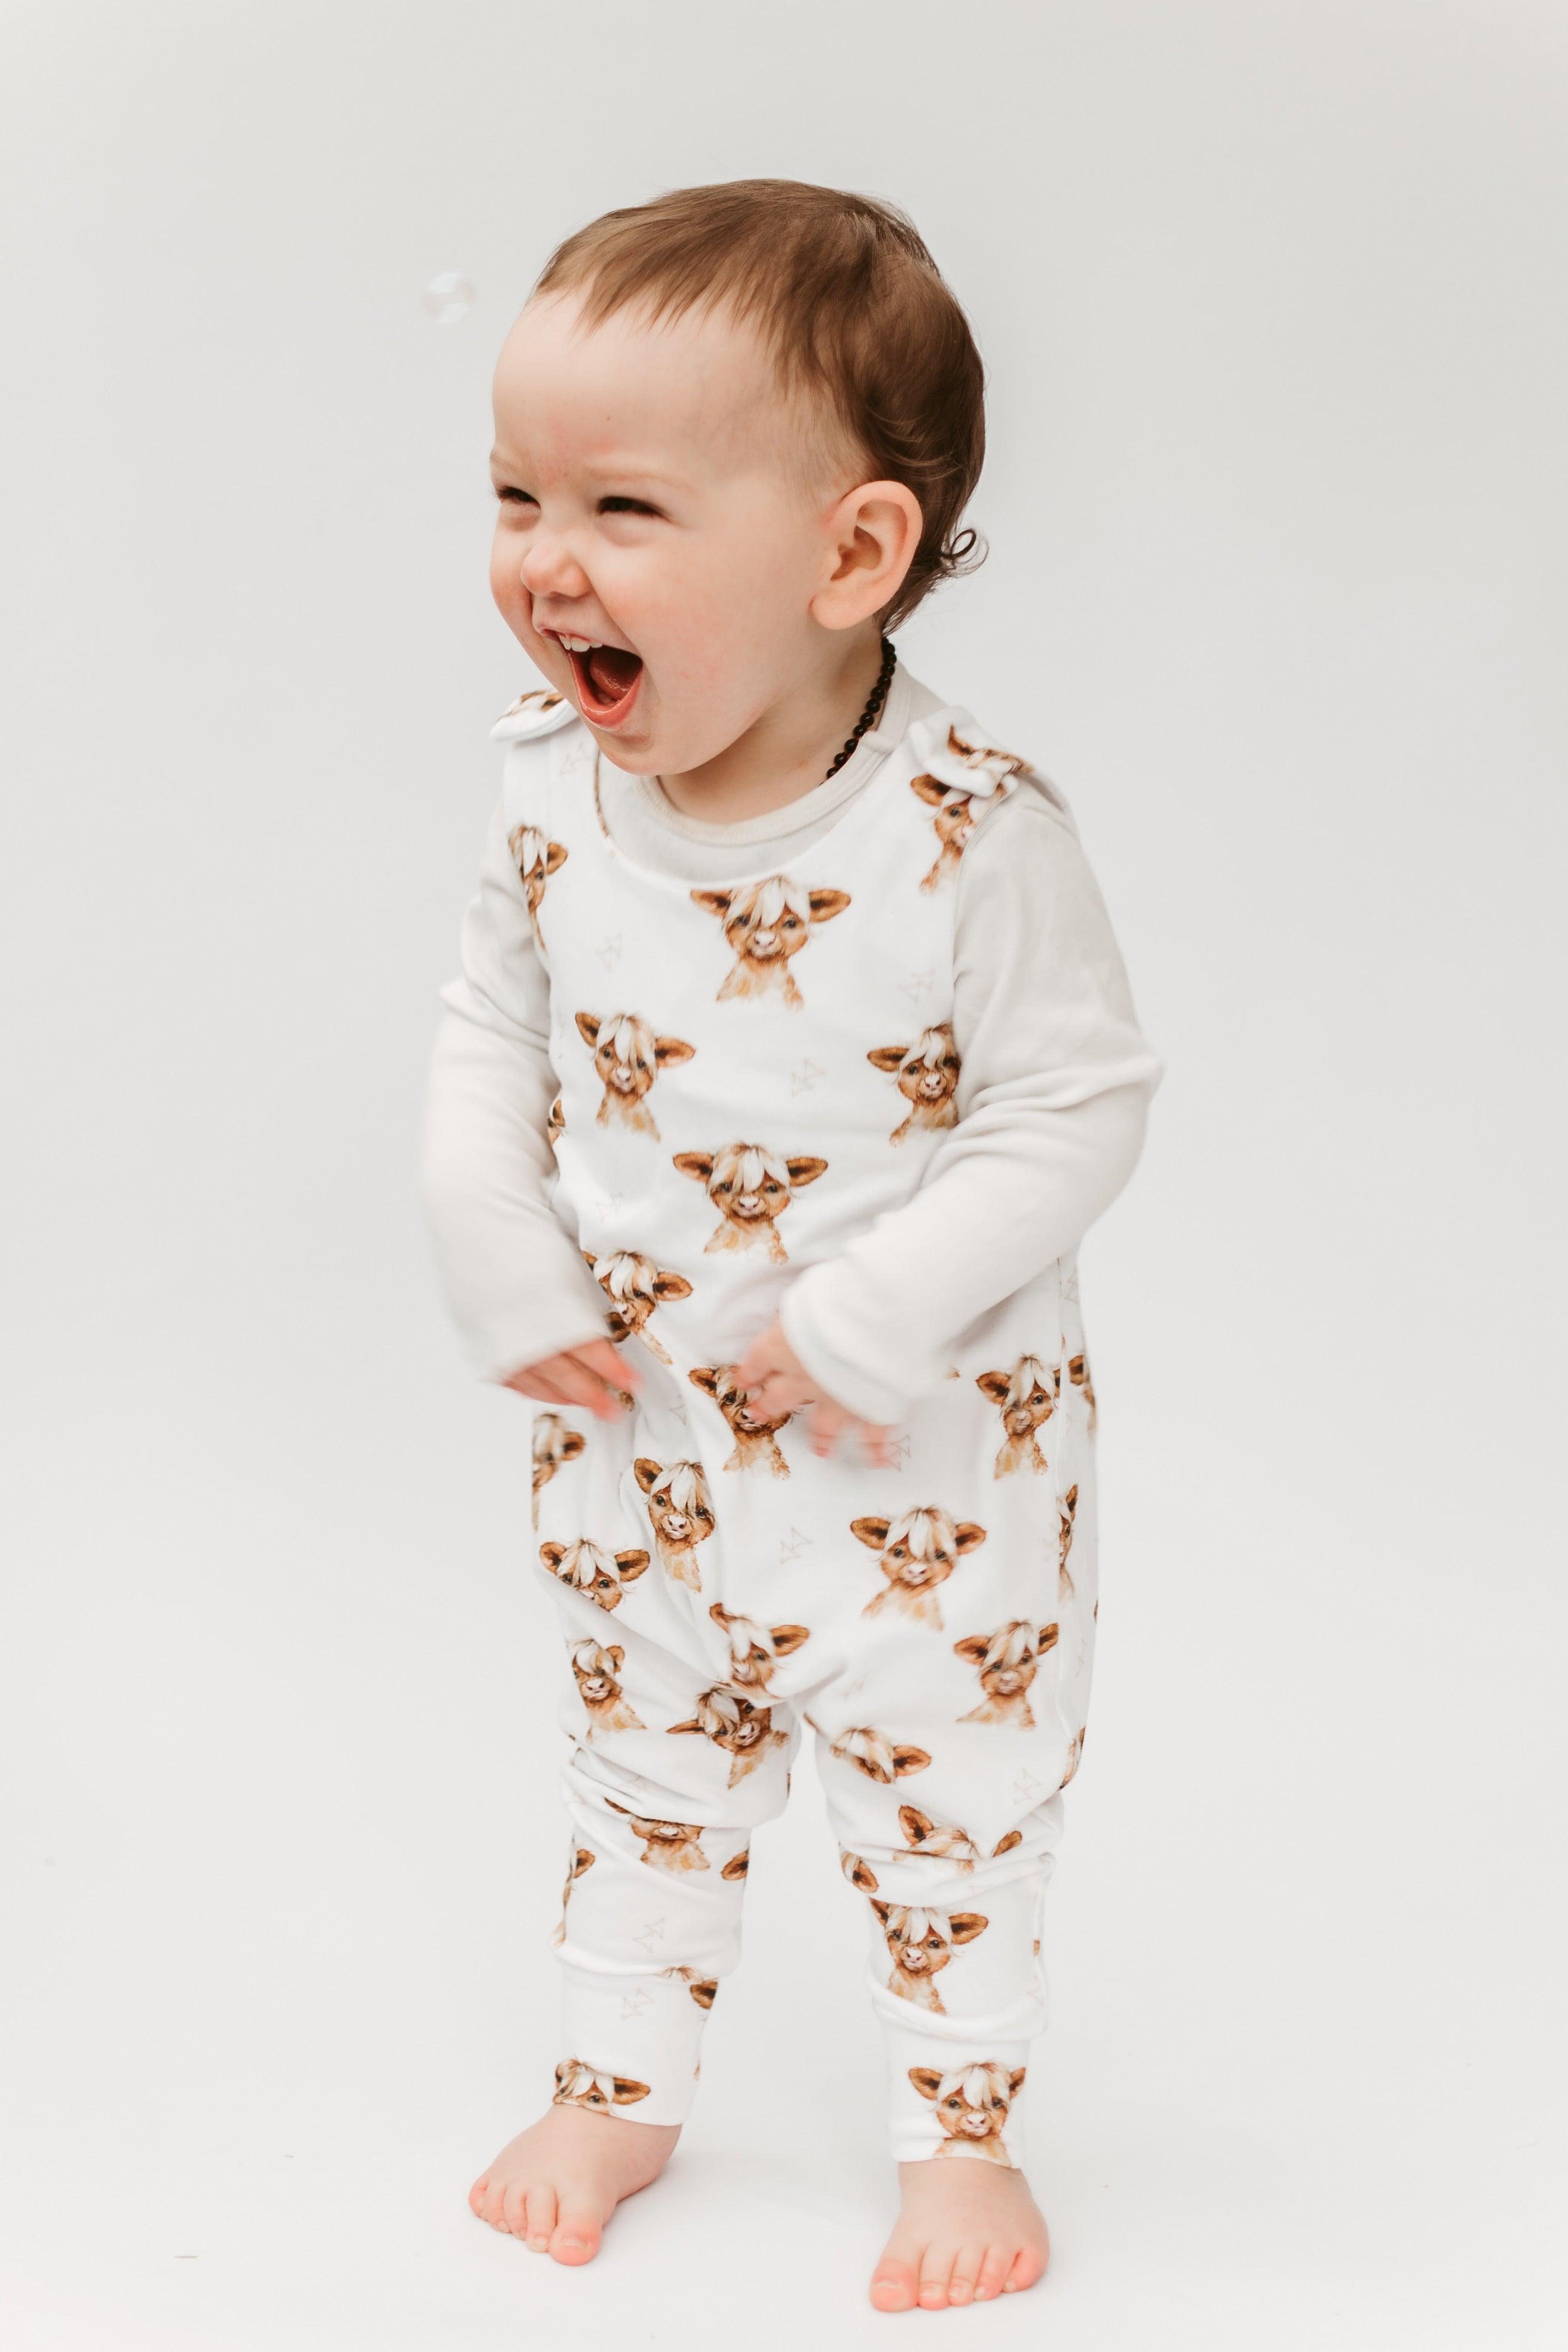 files/hamish-the-highland-cow-dungaree-romper-claybearofficial-1.jpg